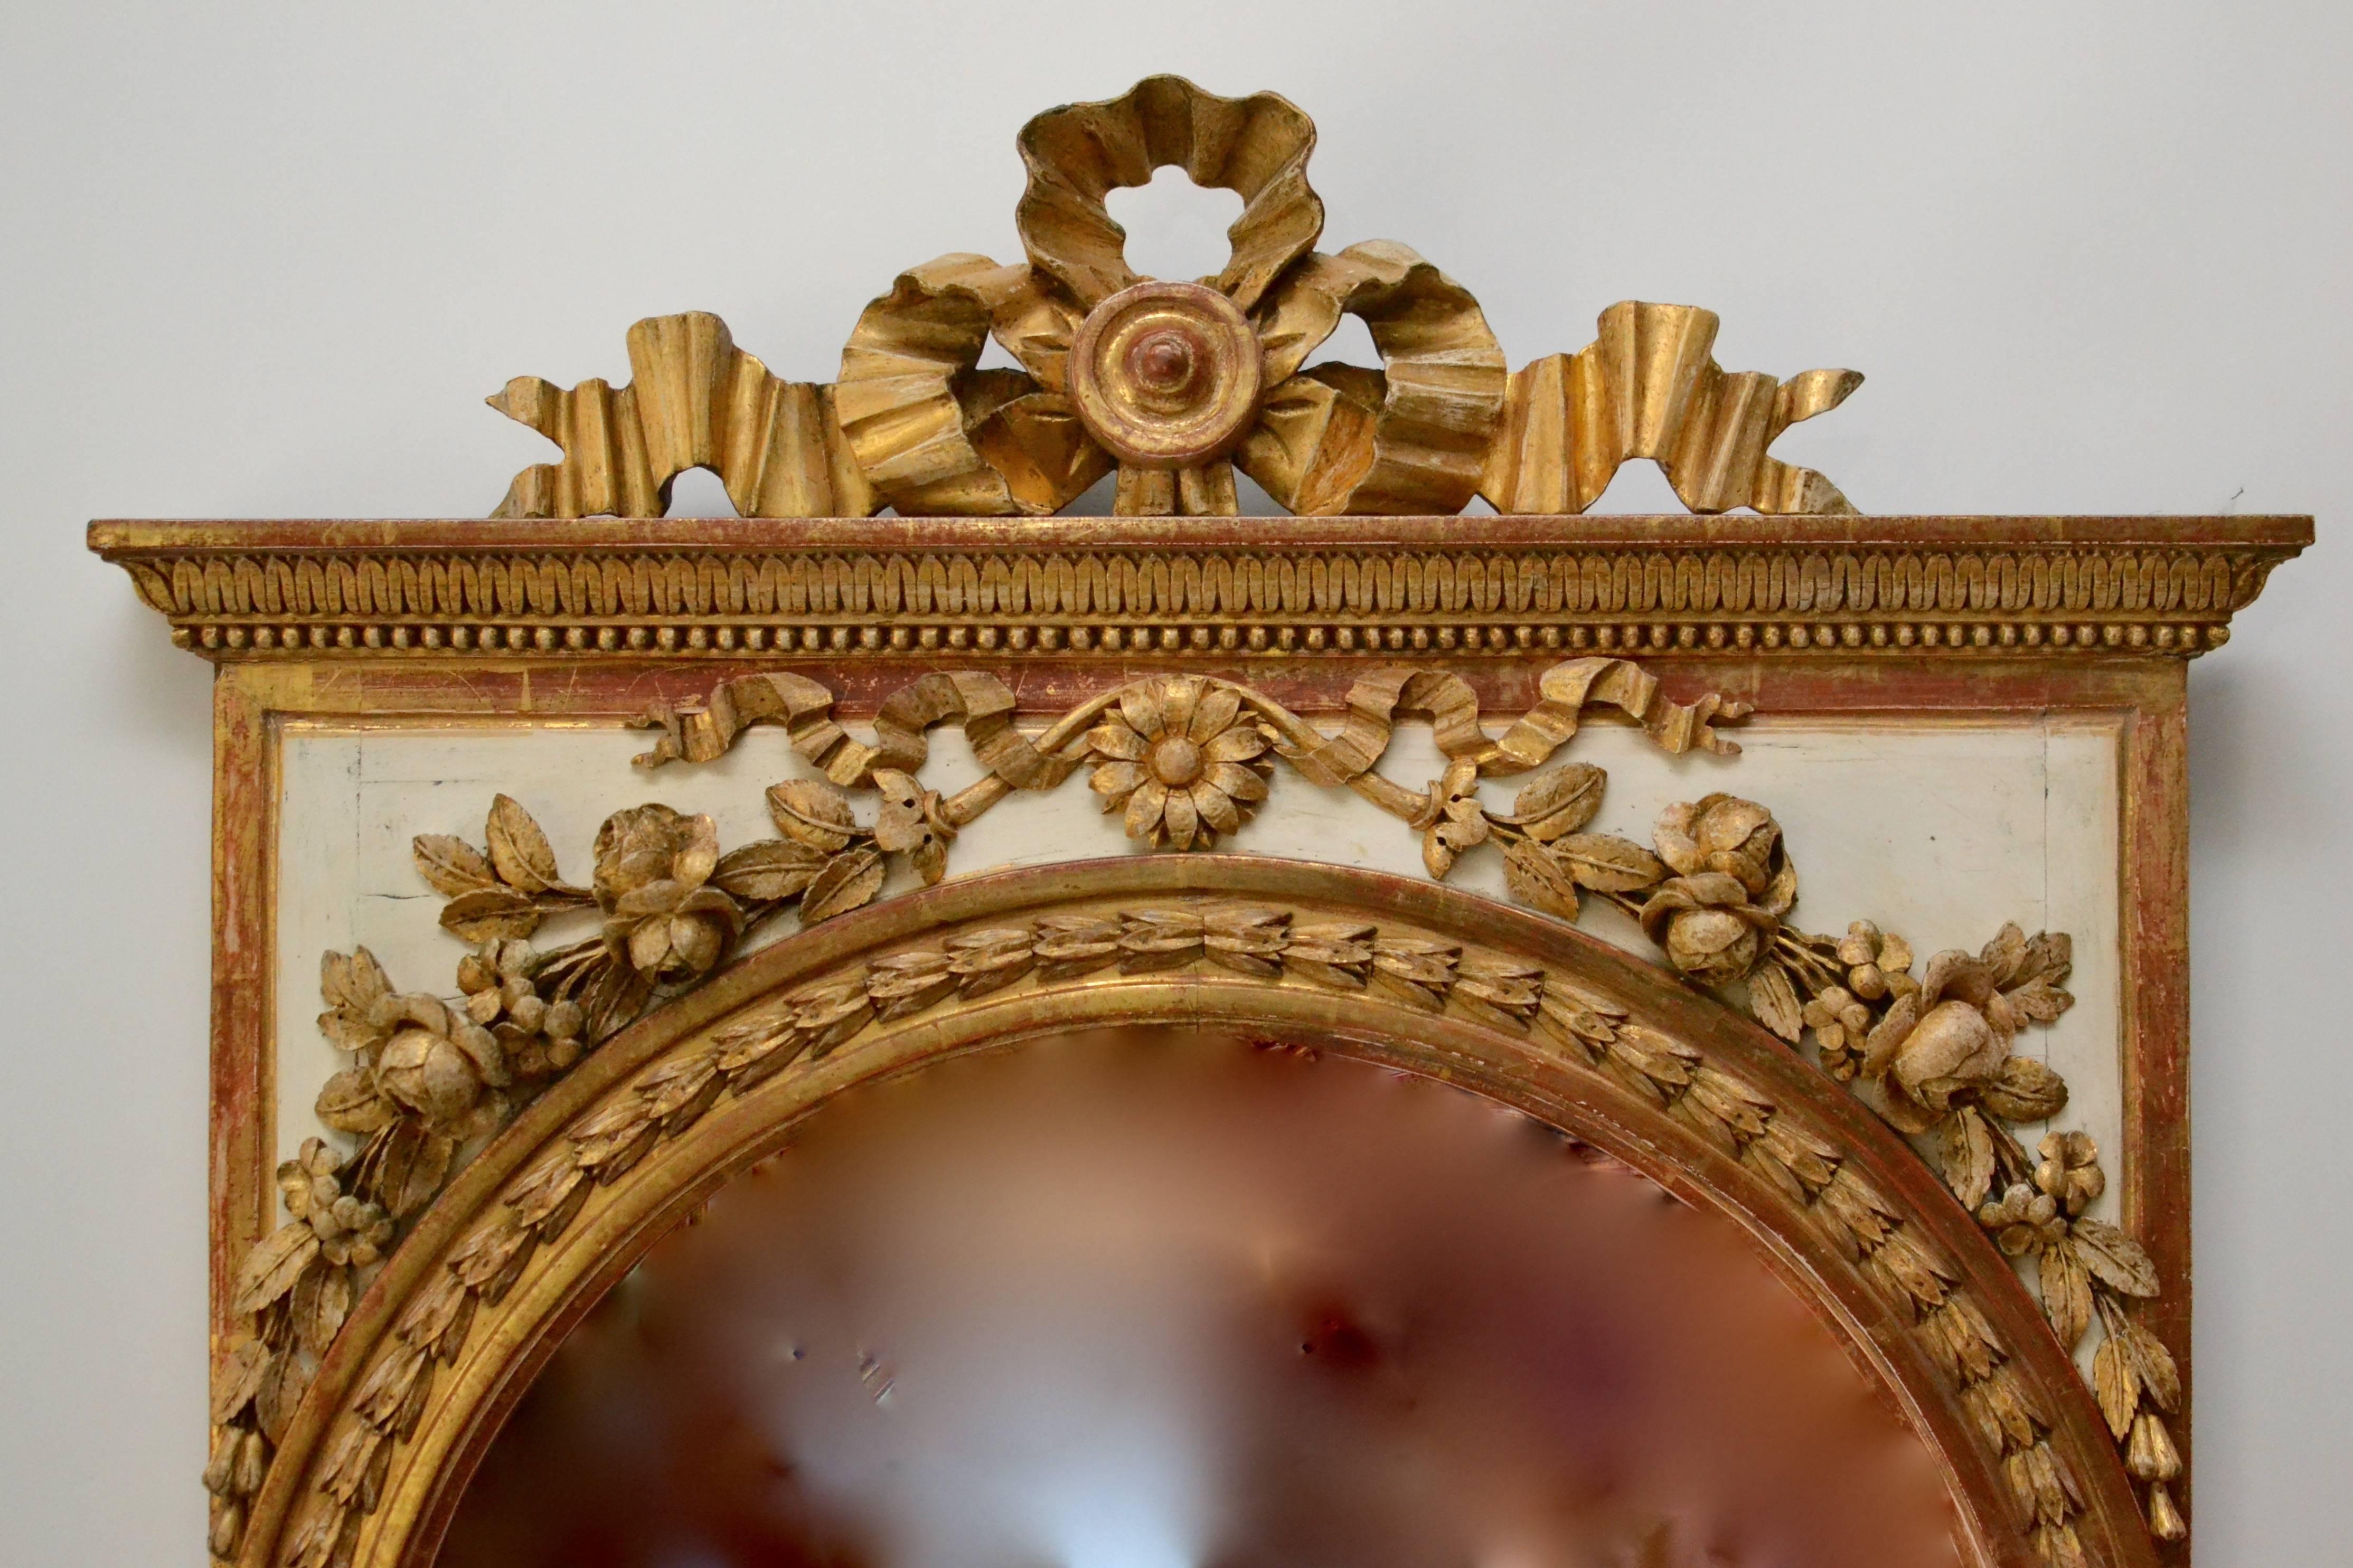 A very fine late Gustavian giltwood mirror by Per Ljung (1743-1819), Stockholm. Original gilding and glass, circa 1800. Per Ljung was one of the best of his time and had many royal commissions. He did much of the interior in the Haga